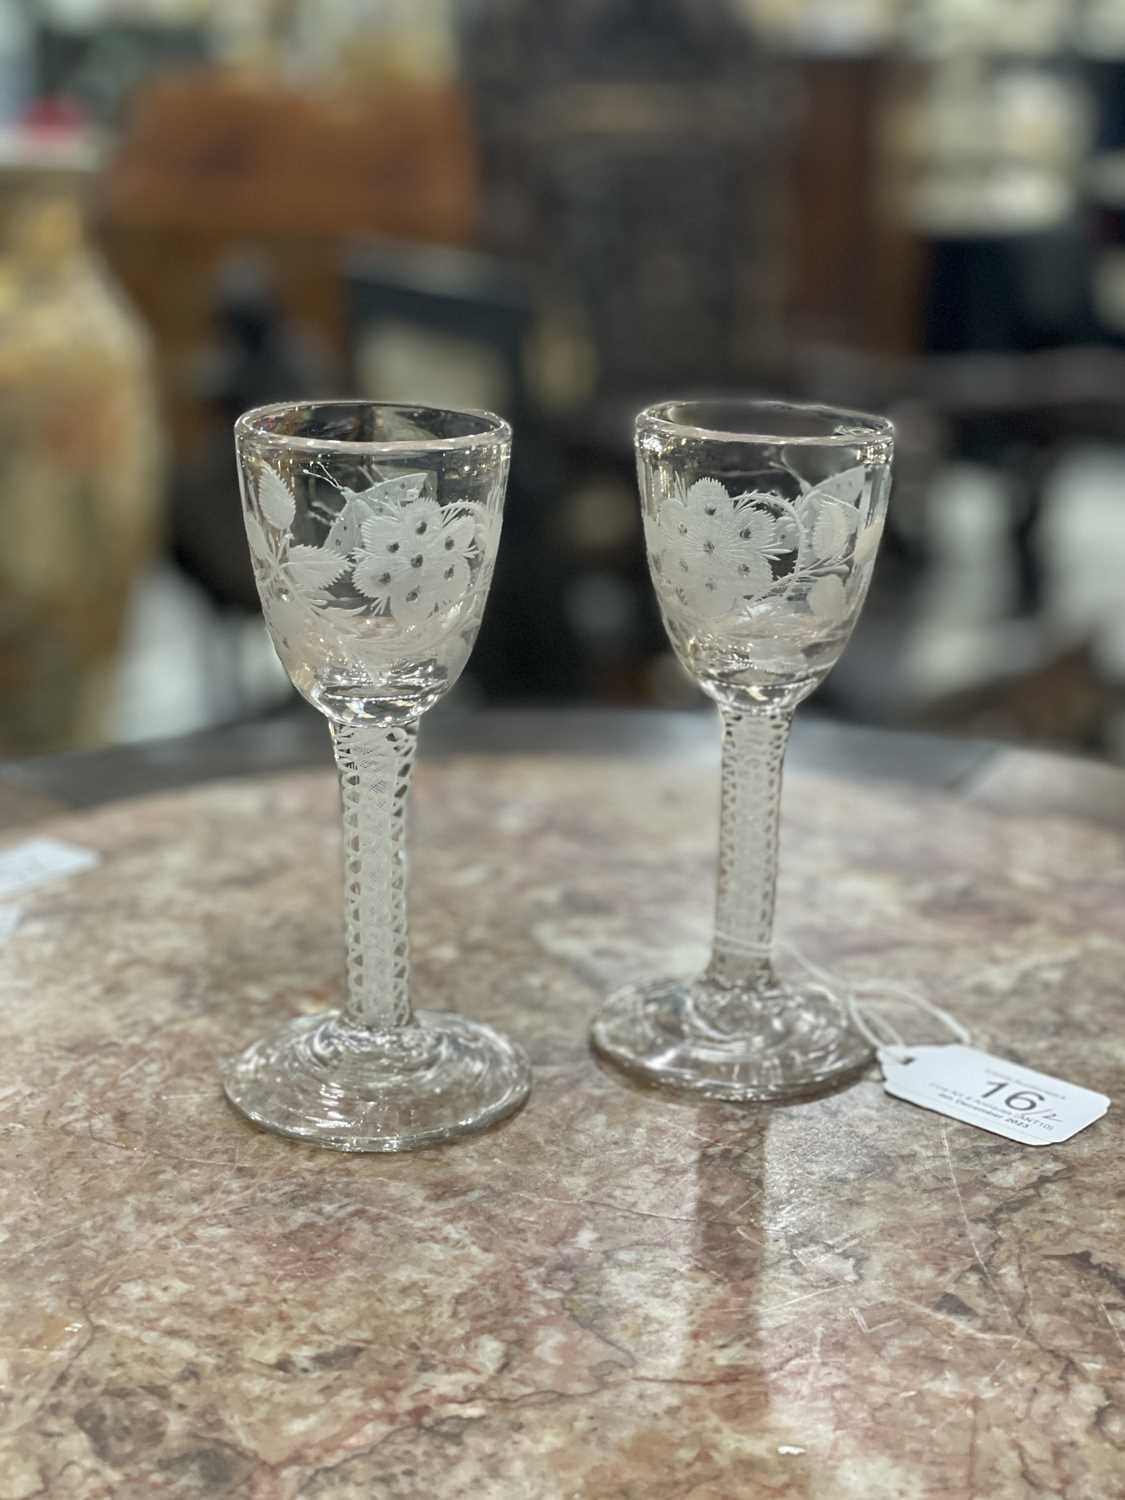 A PAIR OF 18TH CENTURY 'JACOBITE' WINE GLASSES, CIRCA 1770 - Image 4 of 8